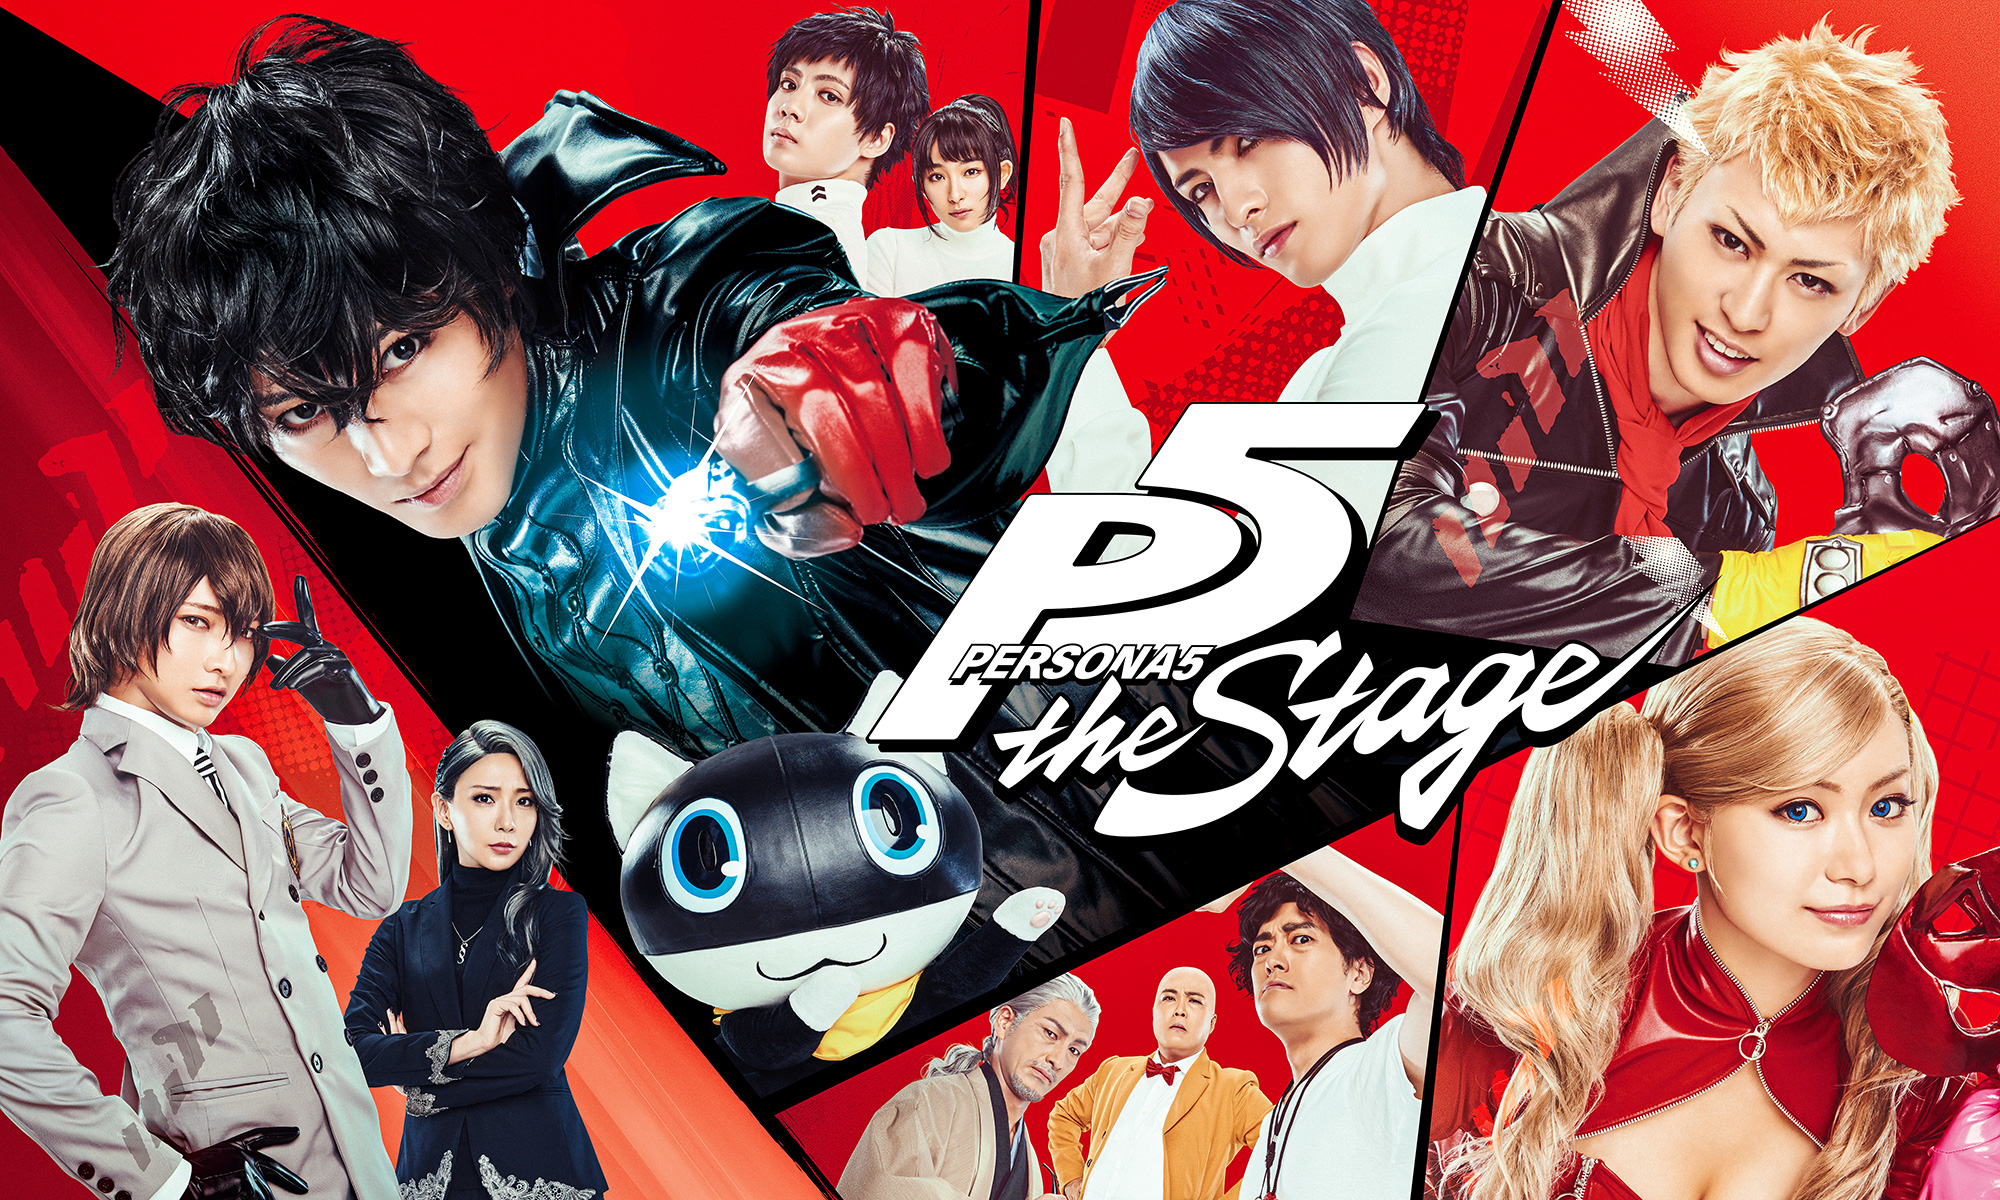 「PERSONA5 the Stage」公式サイト（P5 舞台 PERSONA5 Persona5 ステージ P5ステ ぺごステ）